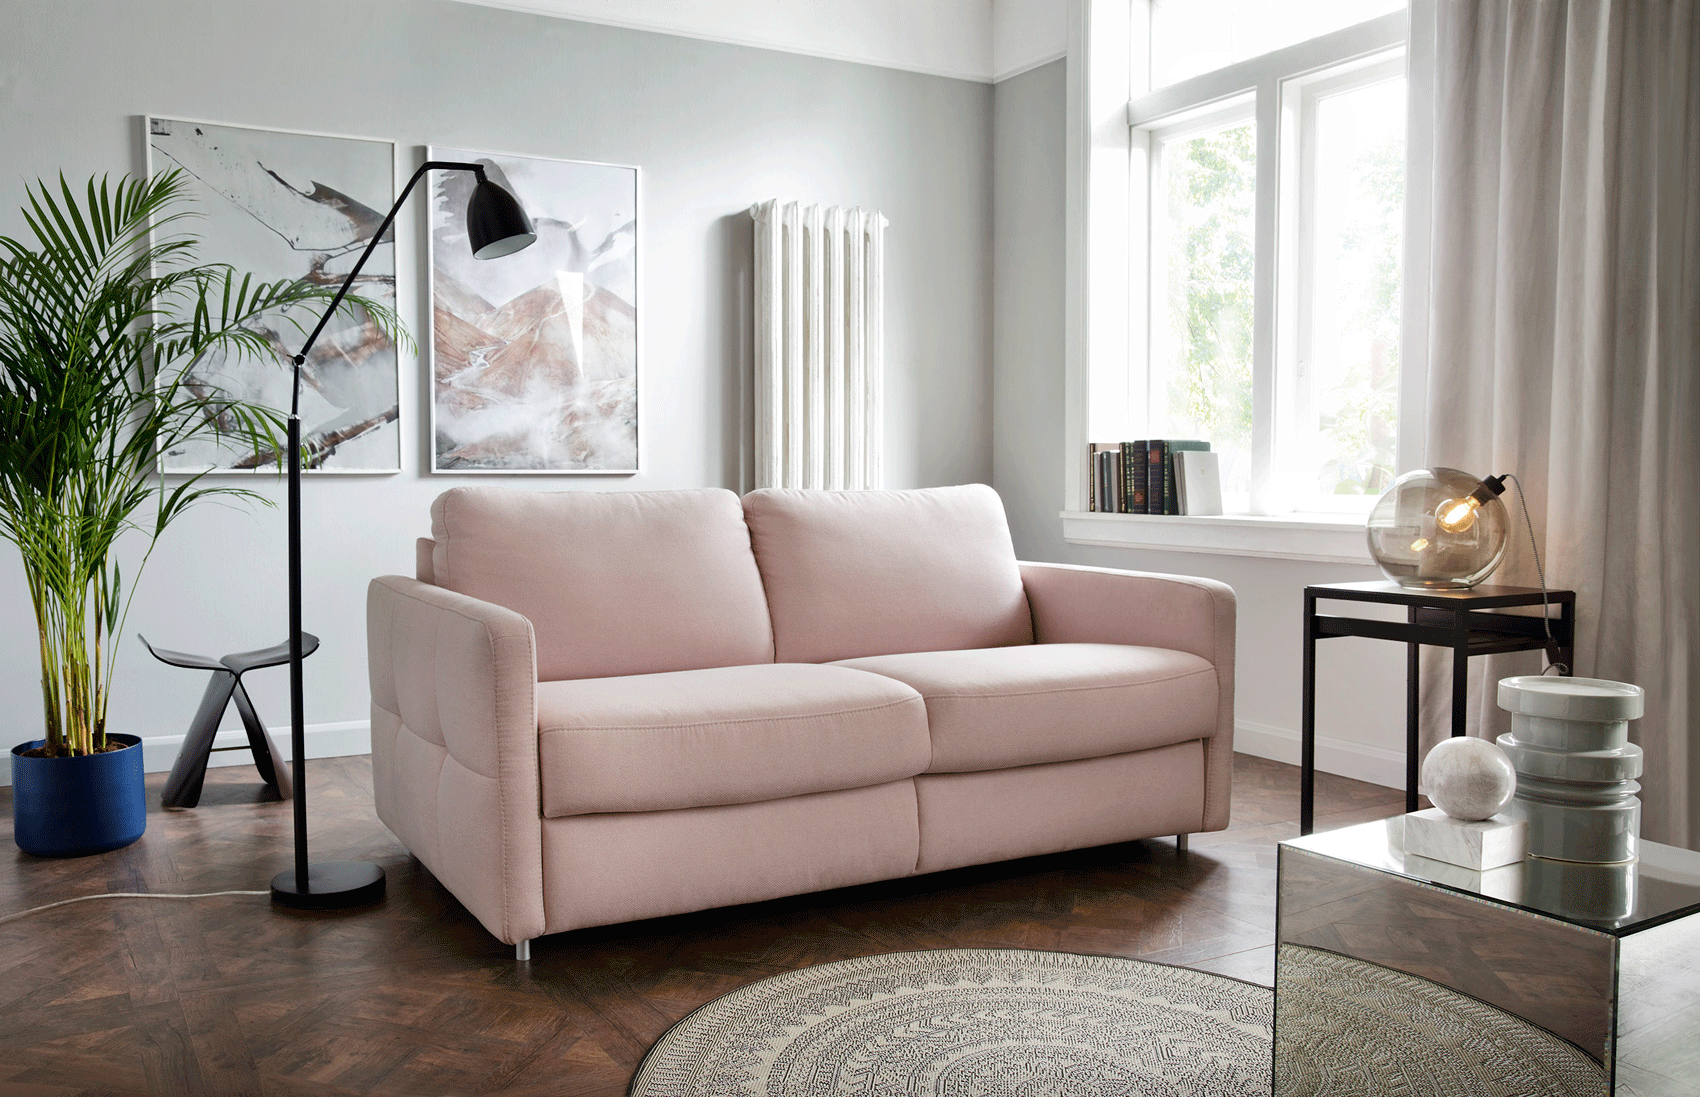 Brands Suinta Modern Collection, Spain Ema Sofa Bed